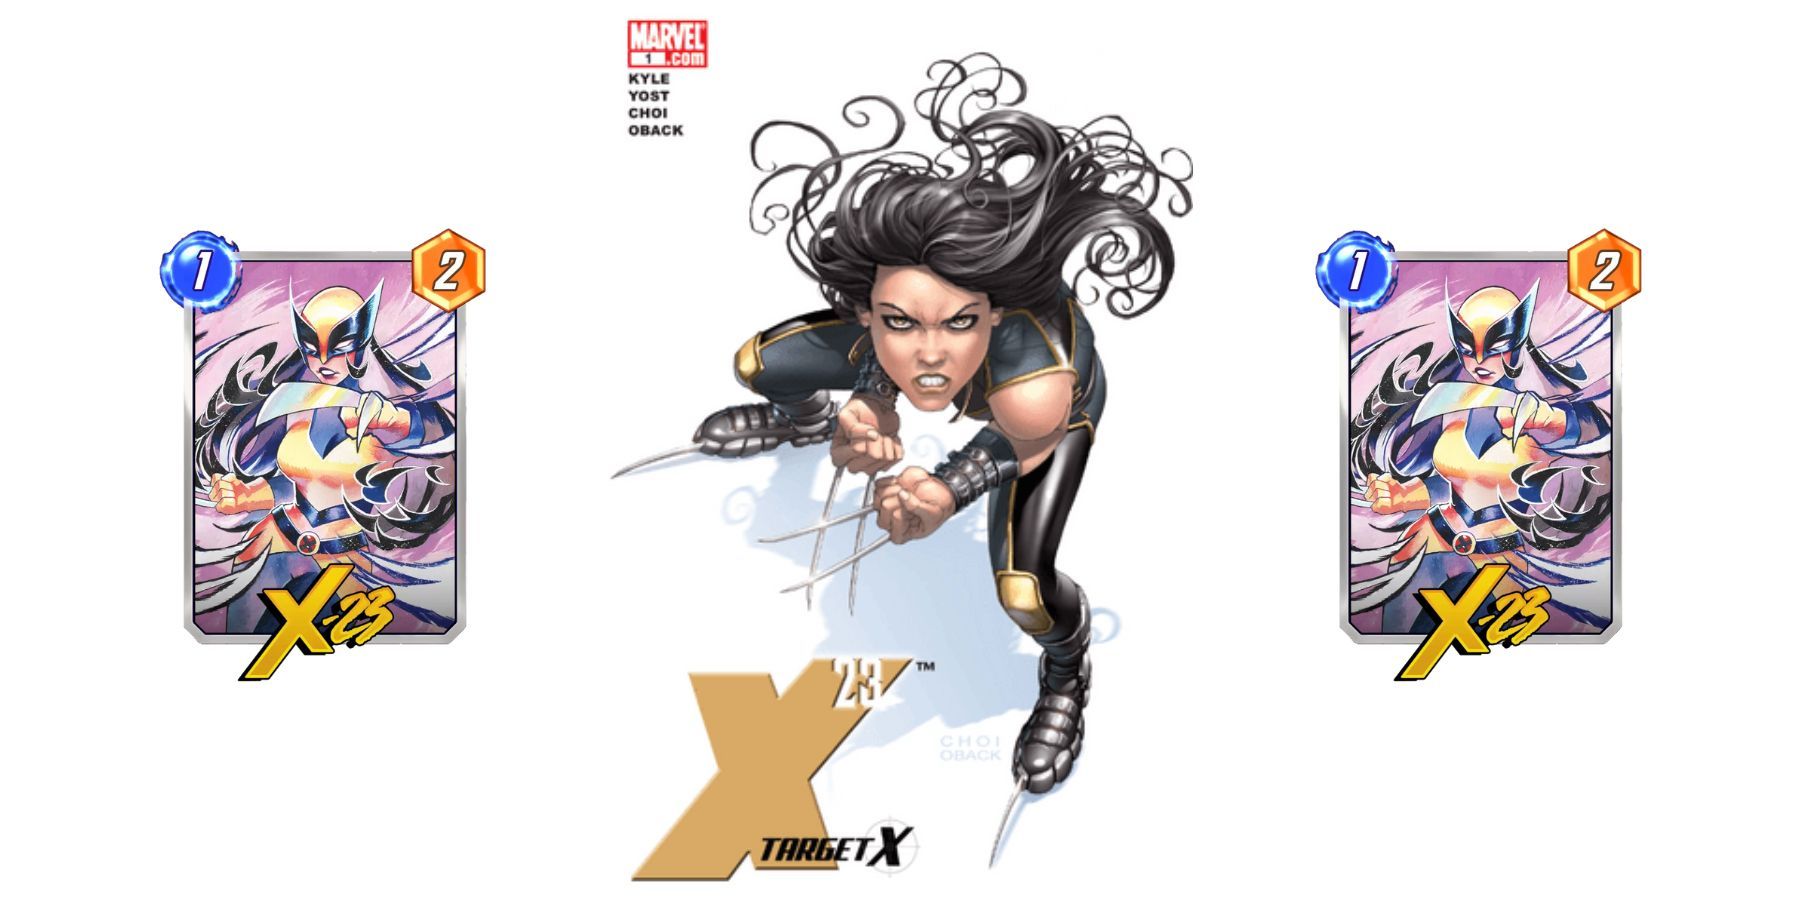 x-23 cover art in marvel snap.